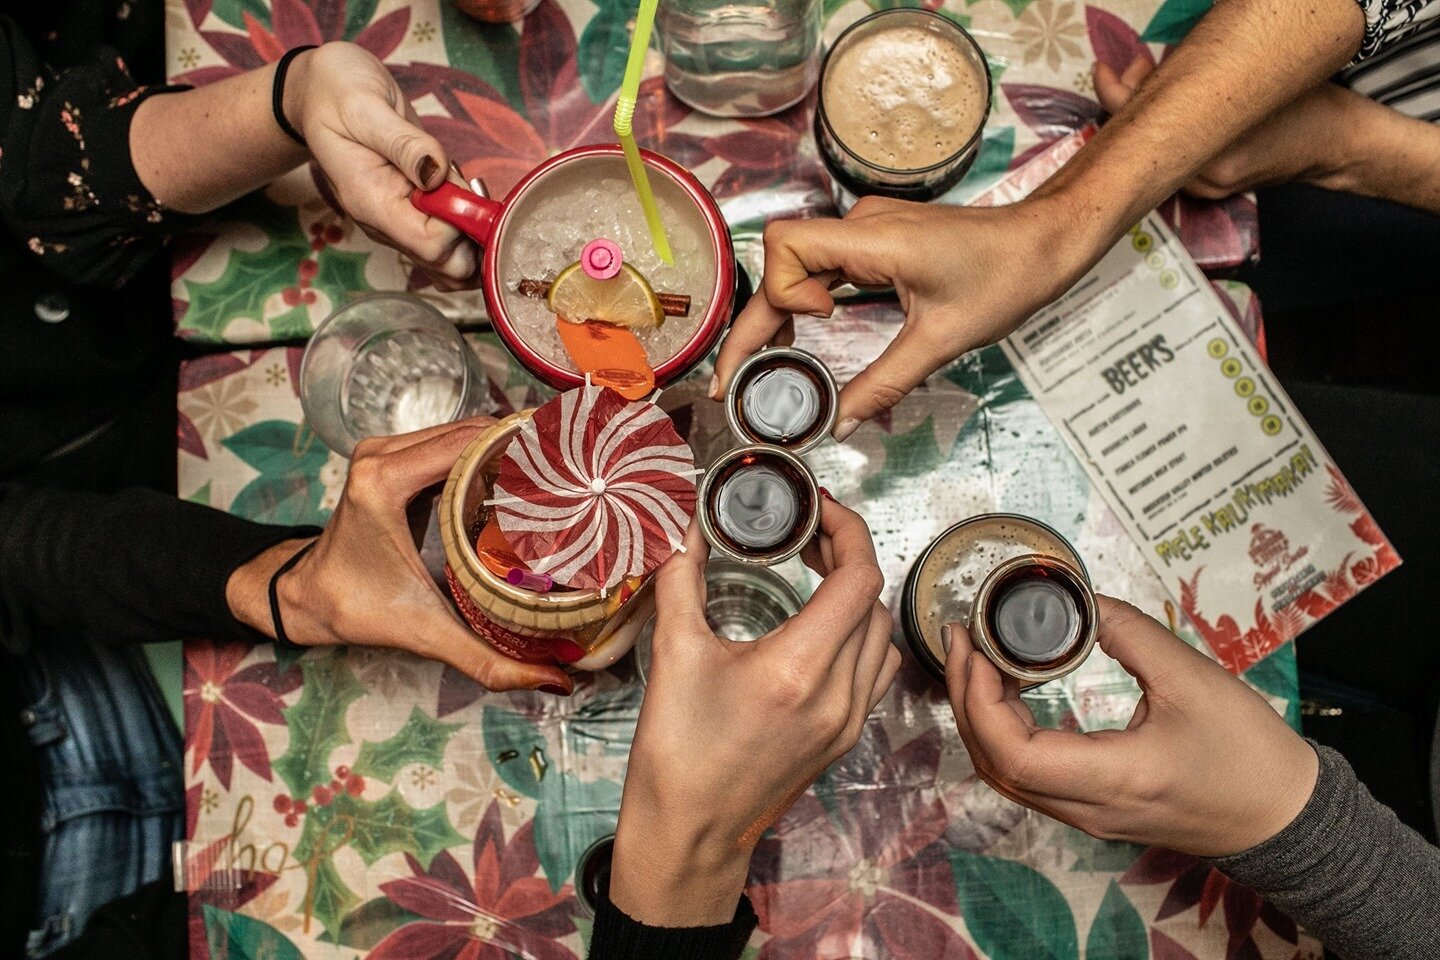 Cheers to a great Sippin' Santa season! Some of our locations are still open: @bitterandtwisted_az, @thevanguardharrison, @themontford.